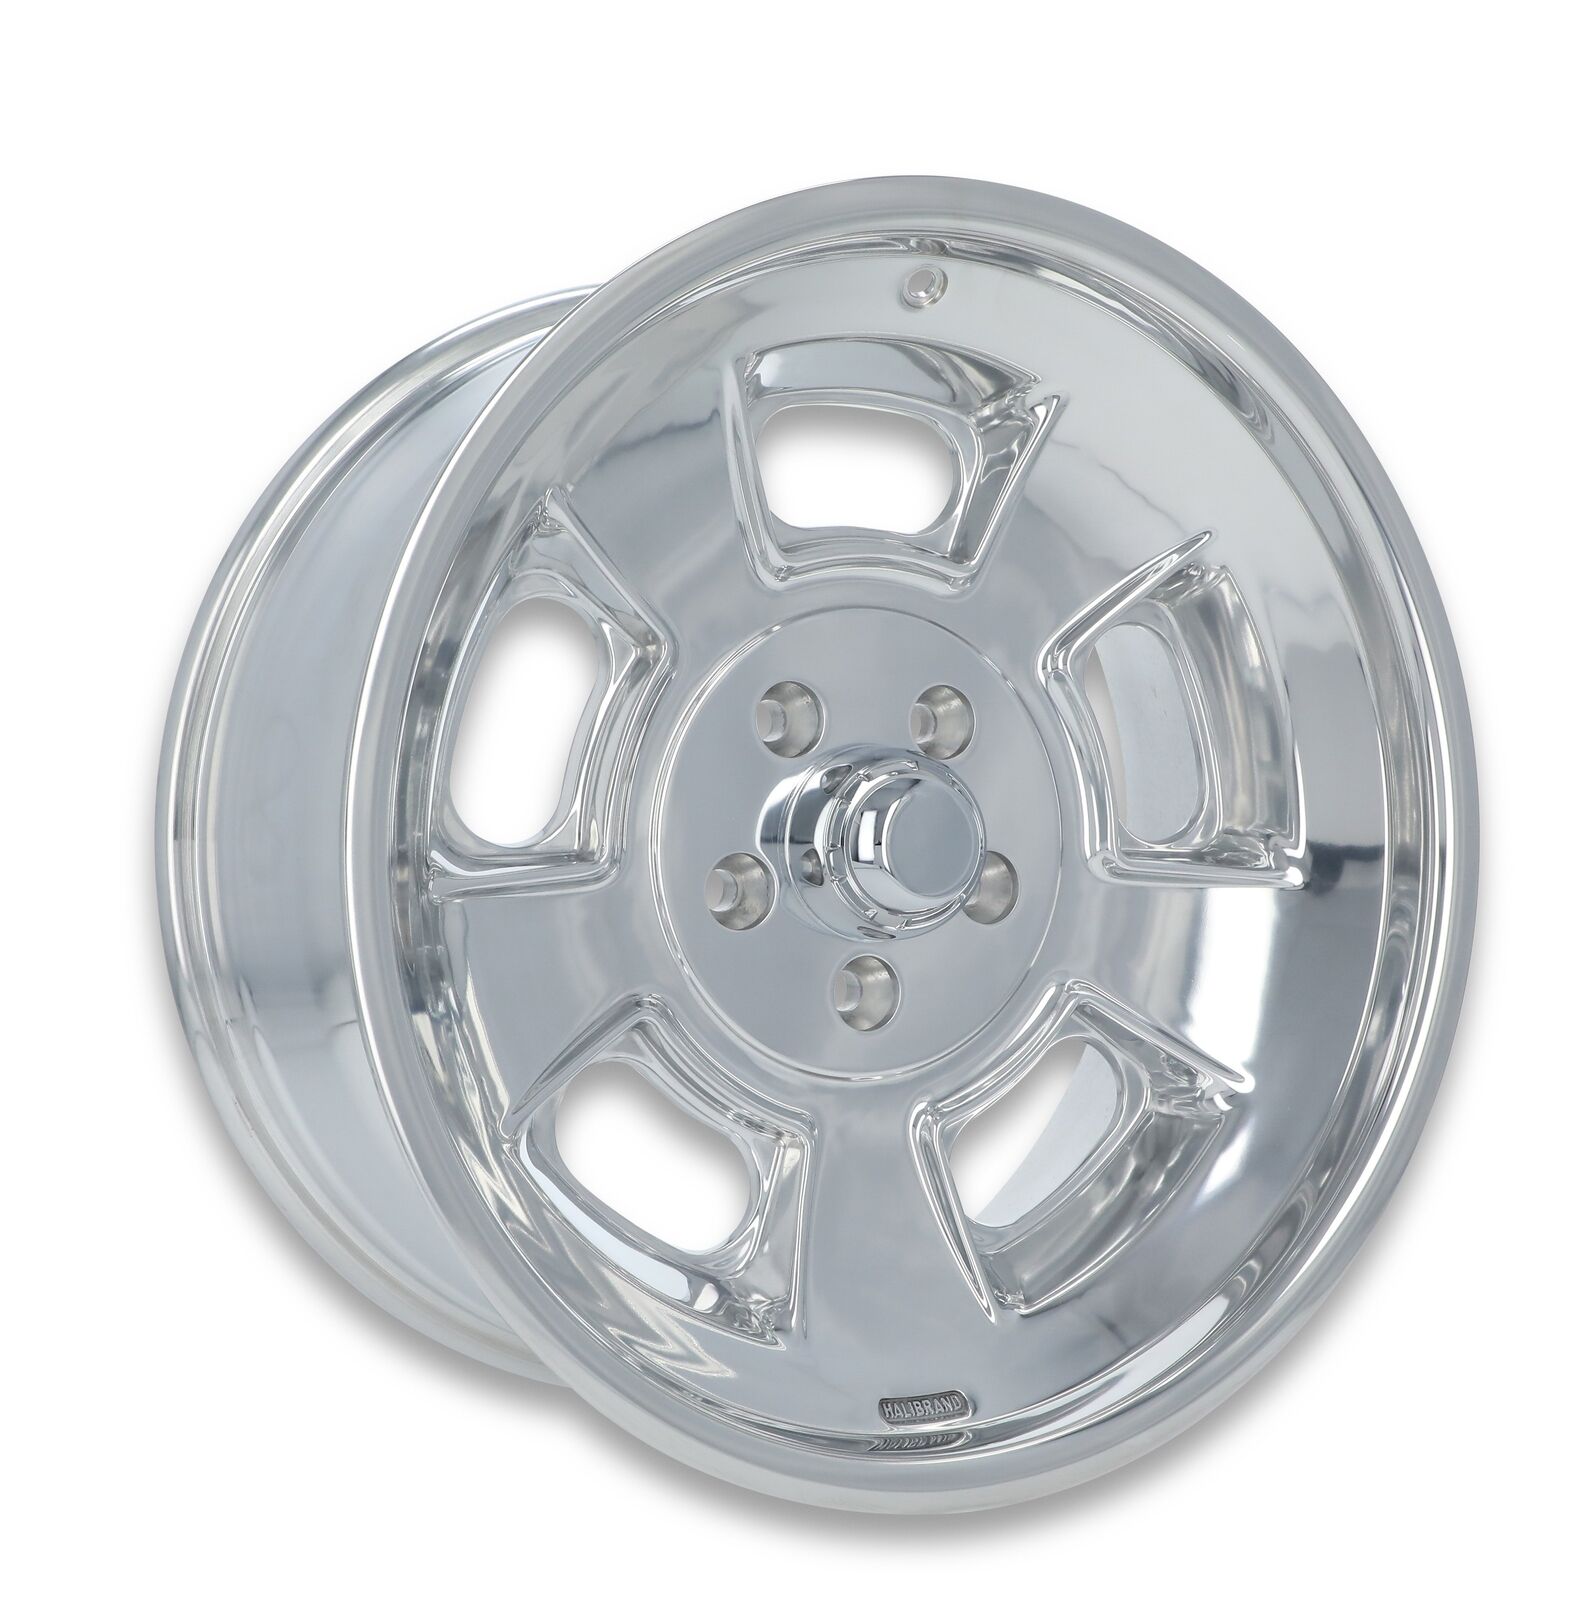 Halibrand Sprint Flow Formed Wheel 19x8.5 - 4.75 bs Polished No Clearcoat - Each